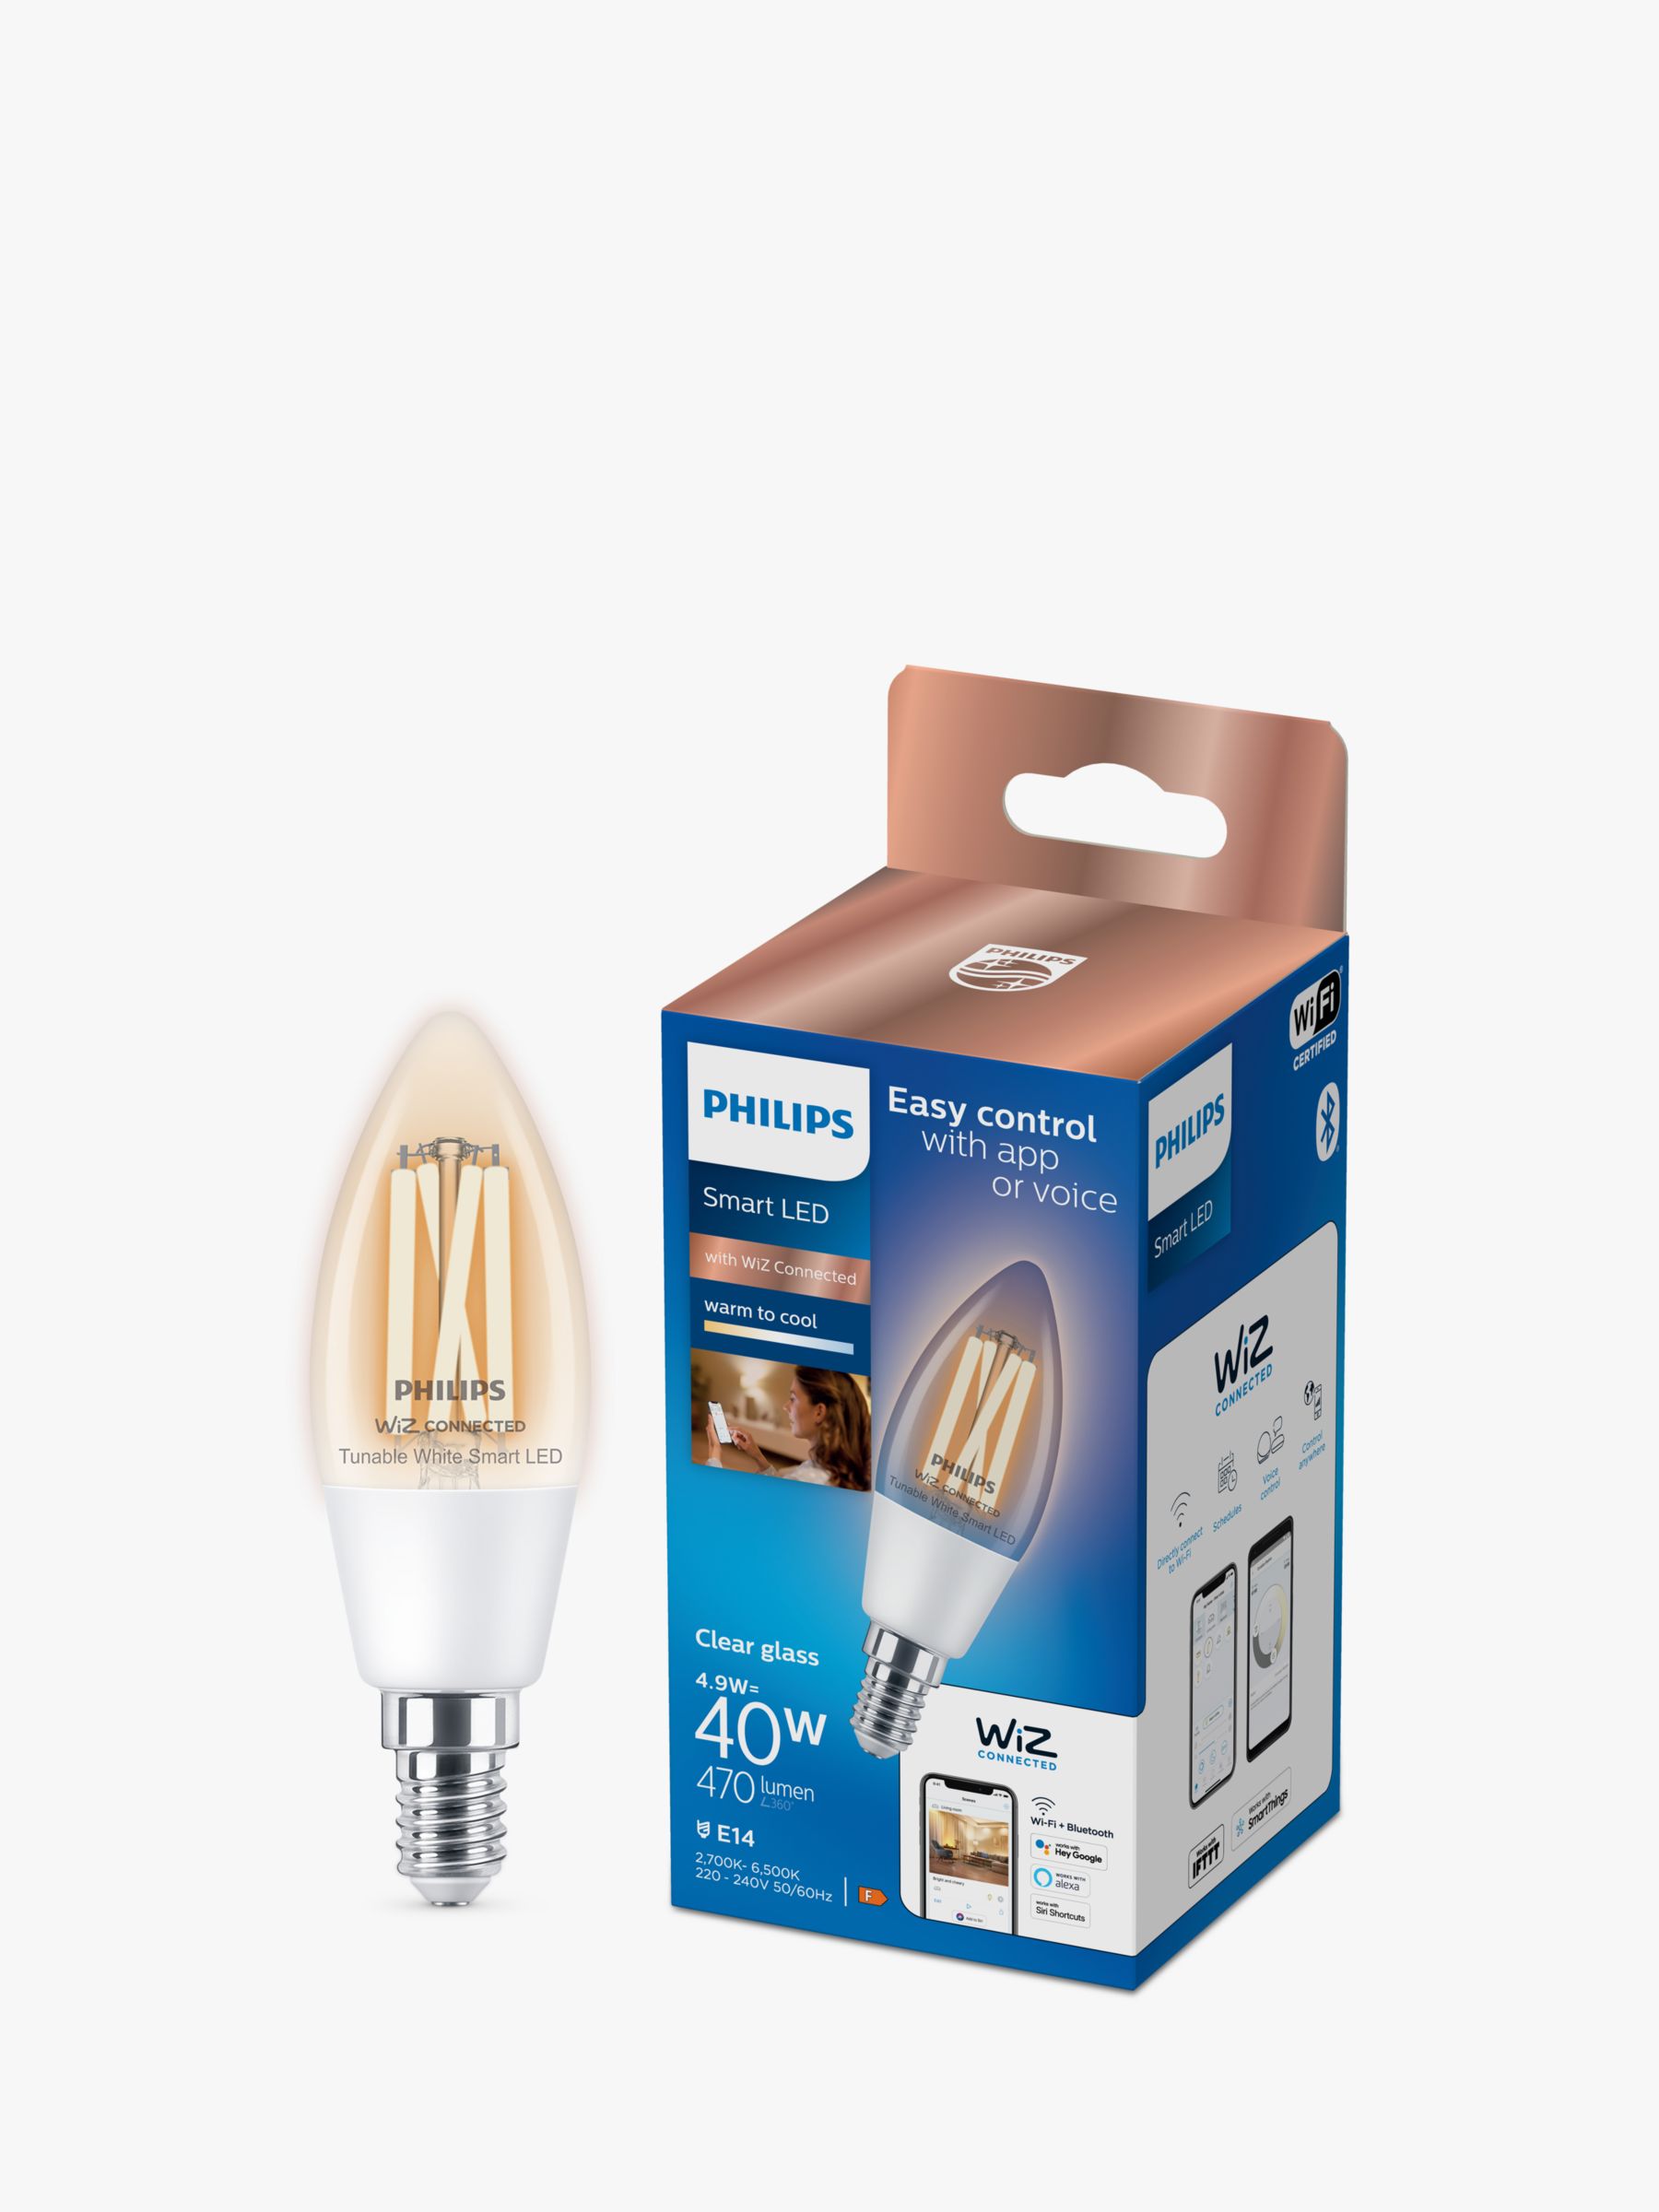 LED 5W E14 Dimmable Warm-to-Cool Candle Bulb WiZ Connected and Bluetooth, Clear